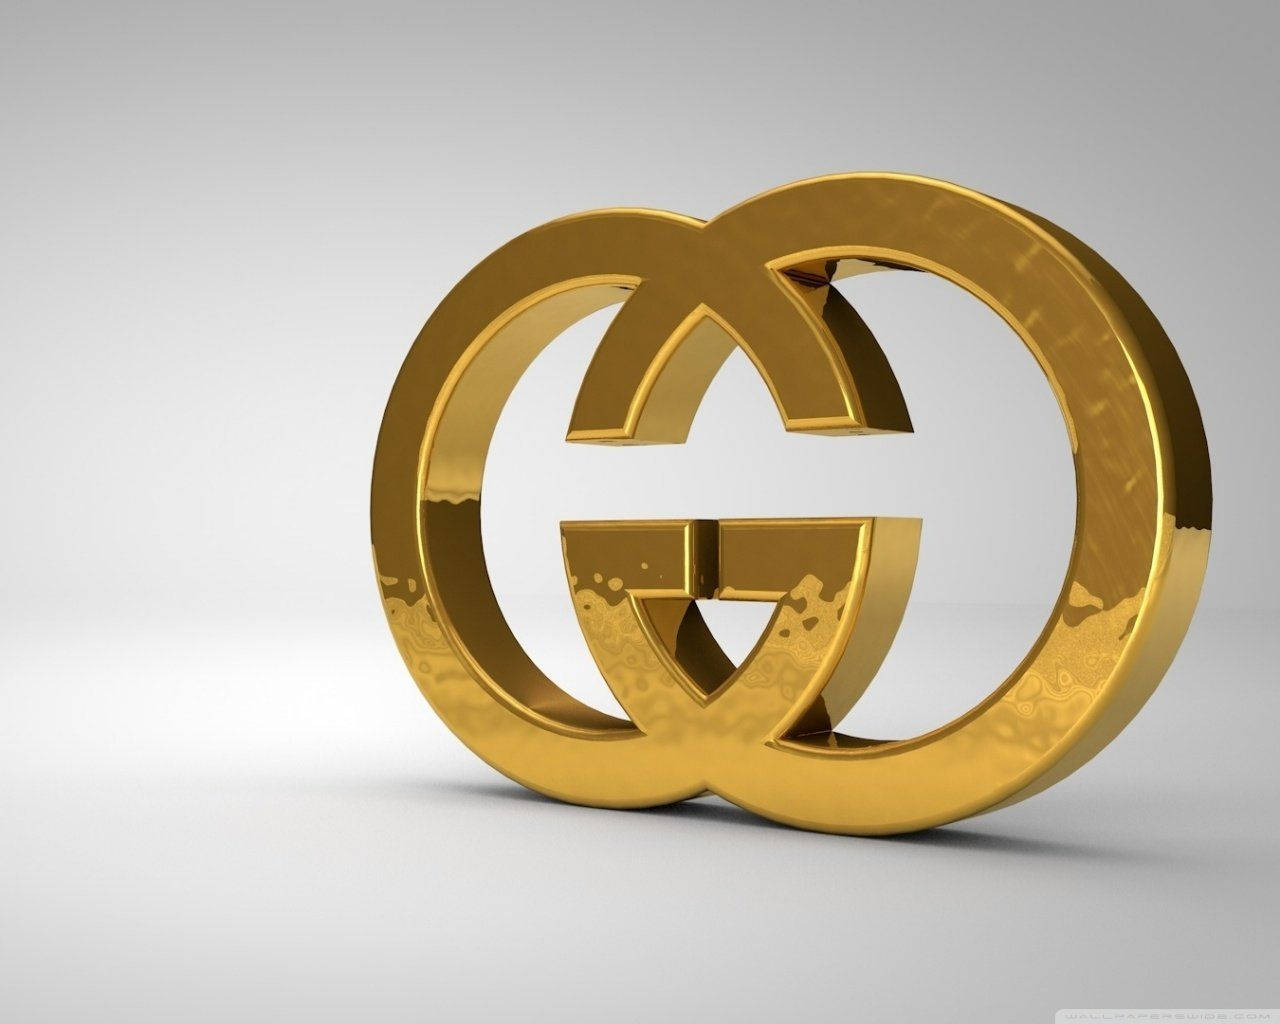 A Gold Gucci Logo On A Gray Background Background